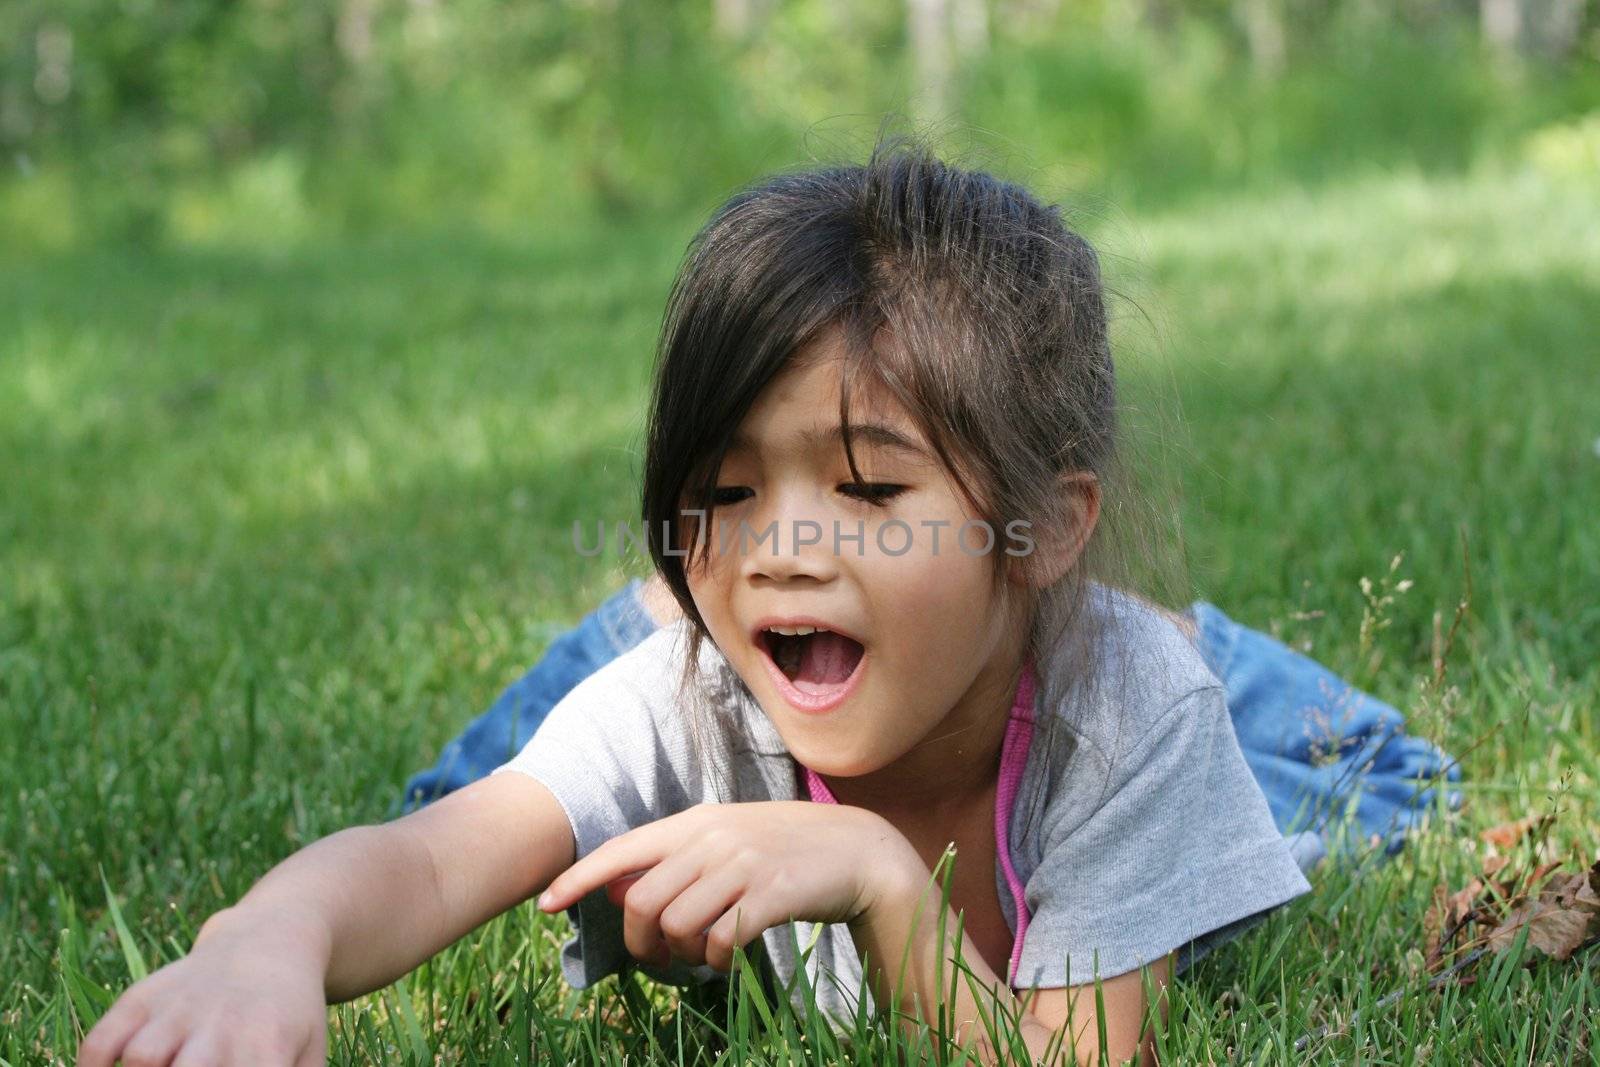 Child discovering something in the grass